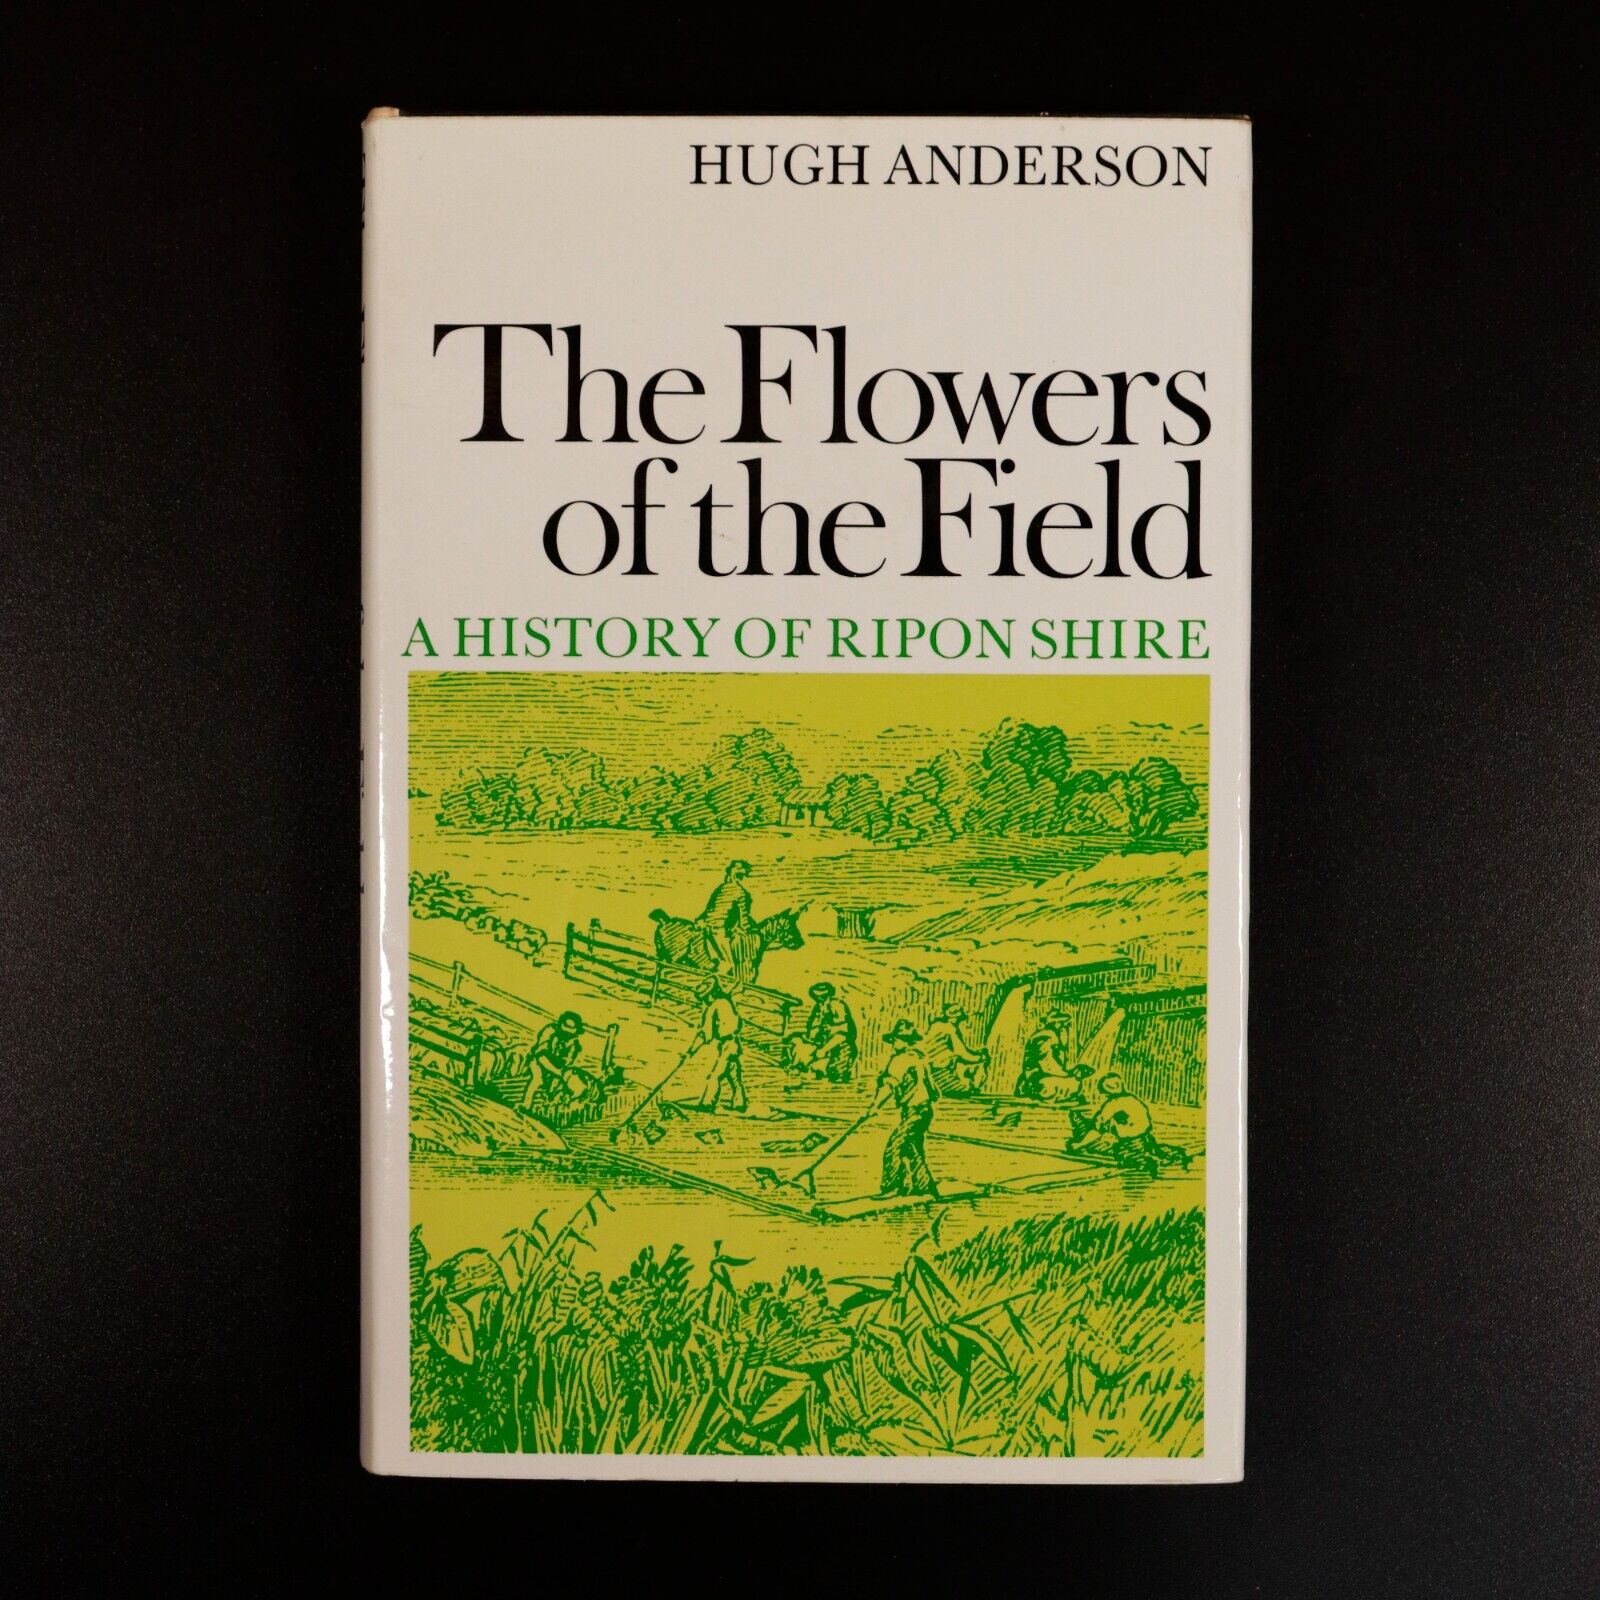 1969 The Flowers Of The Field by Hugh Anderson Ripon Shire Local History Book